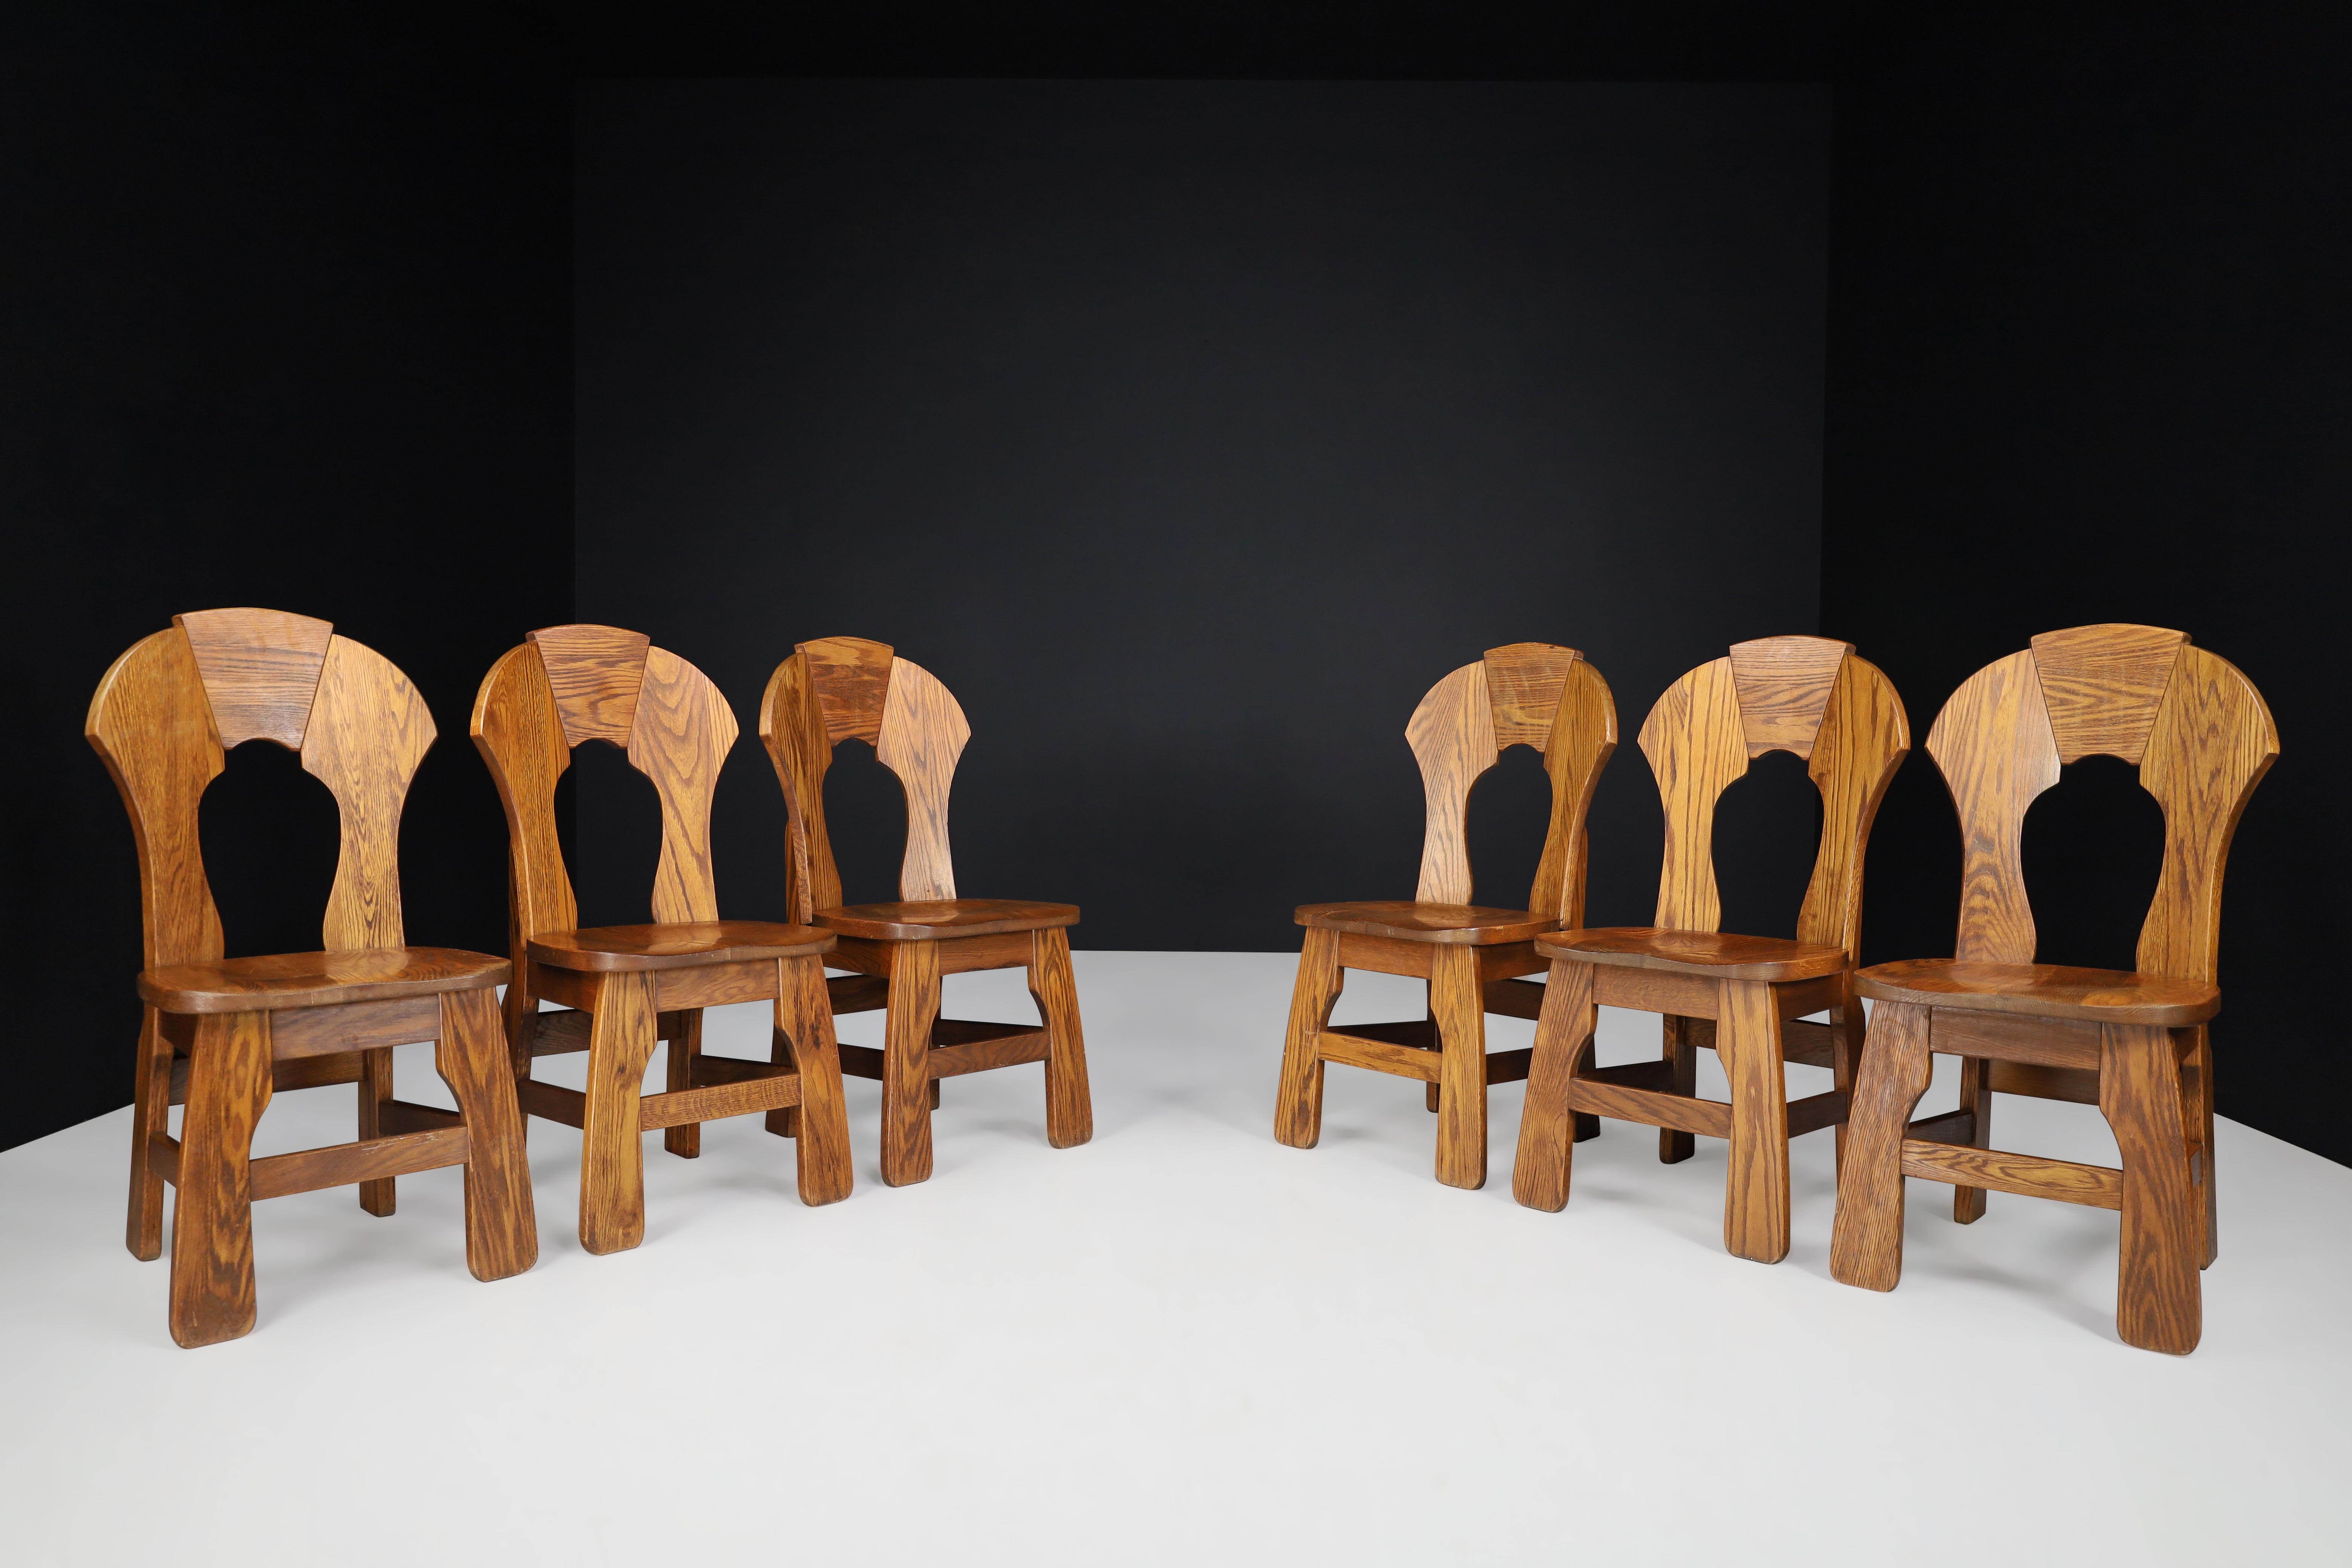 Set of Six Brutalist Oak dining chairs, France, 1960s 

Brutalist, Oak dining chairs with curved in the back, France 1960s. These chairs are made entirely of wood. They are in excellent original condition. The color of the wood is very warm and is